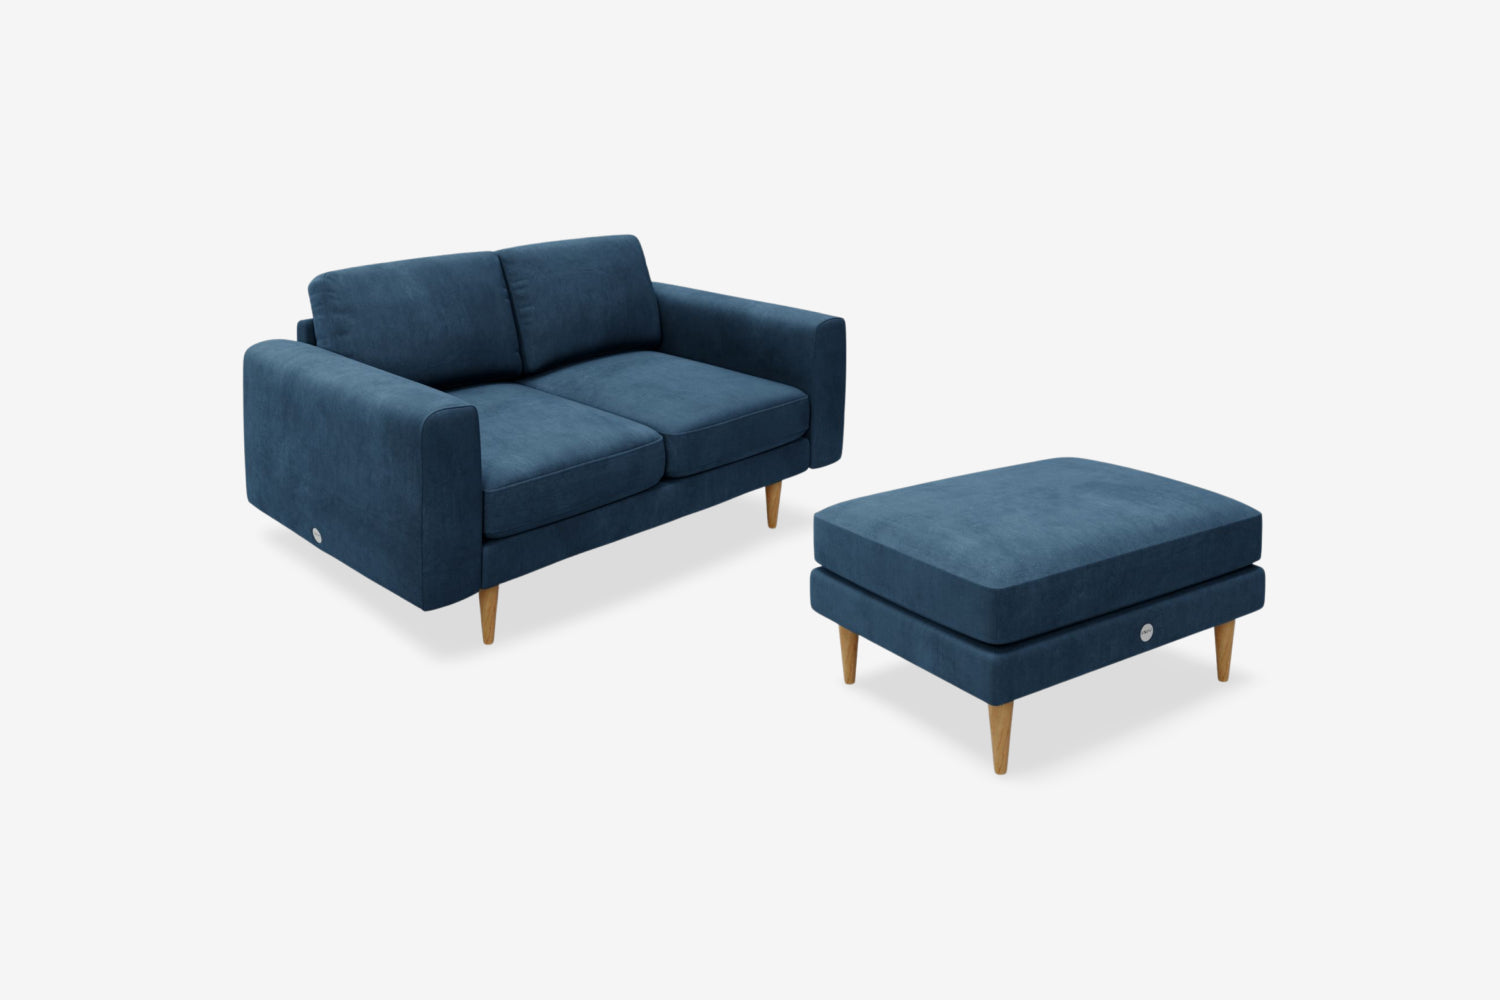 The Big Chill - 2 Seater Sofa and Footstool Set - Blue Steel